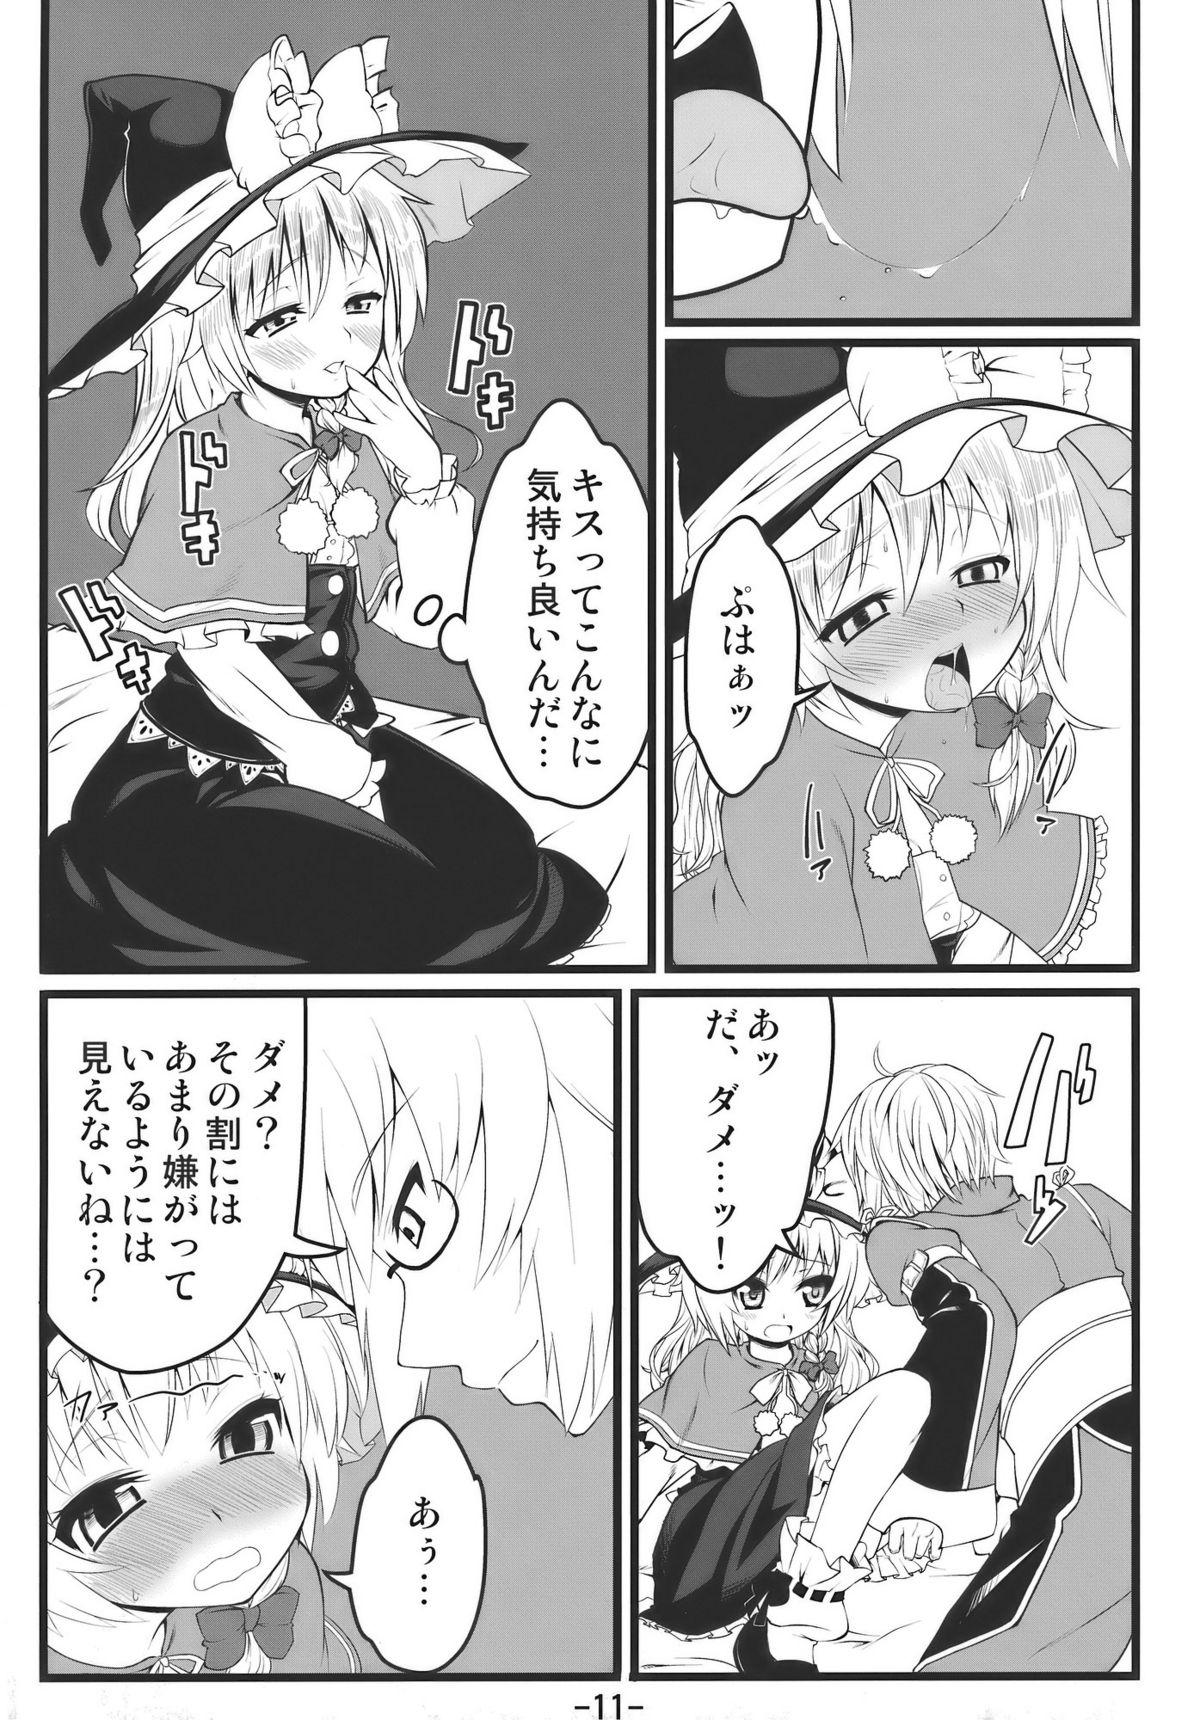 Rubia Memory of Junk - Touhou project Cutie - Page 11